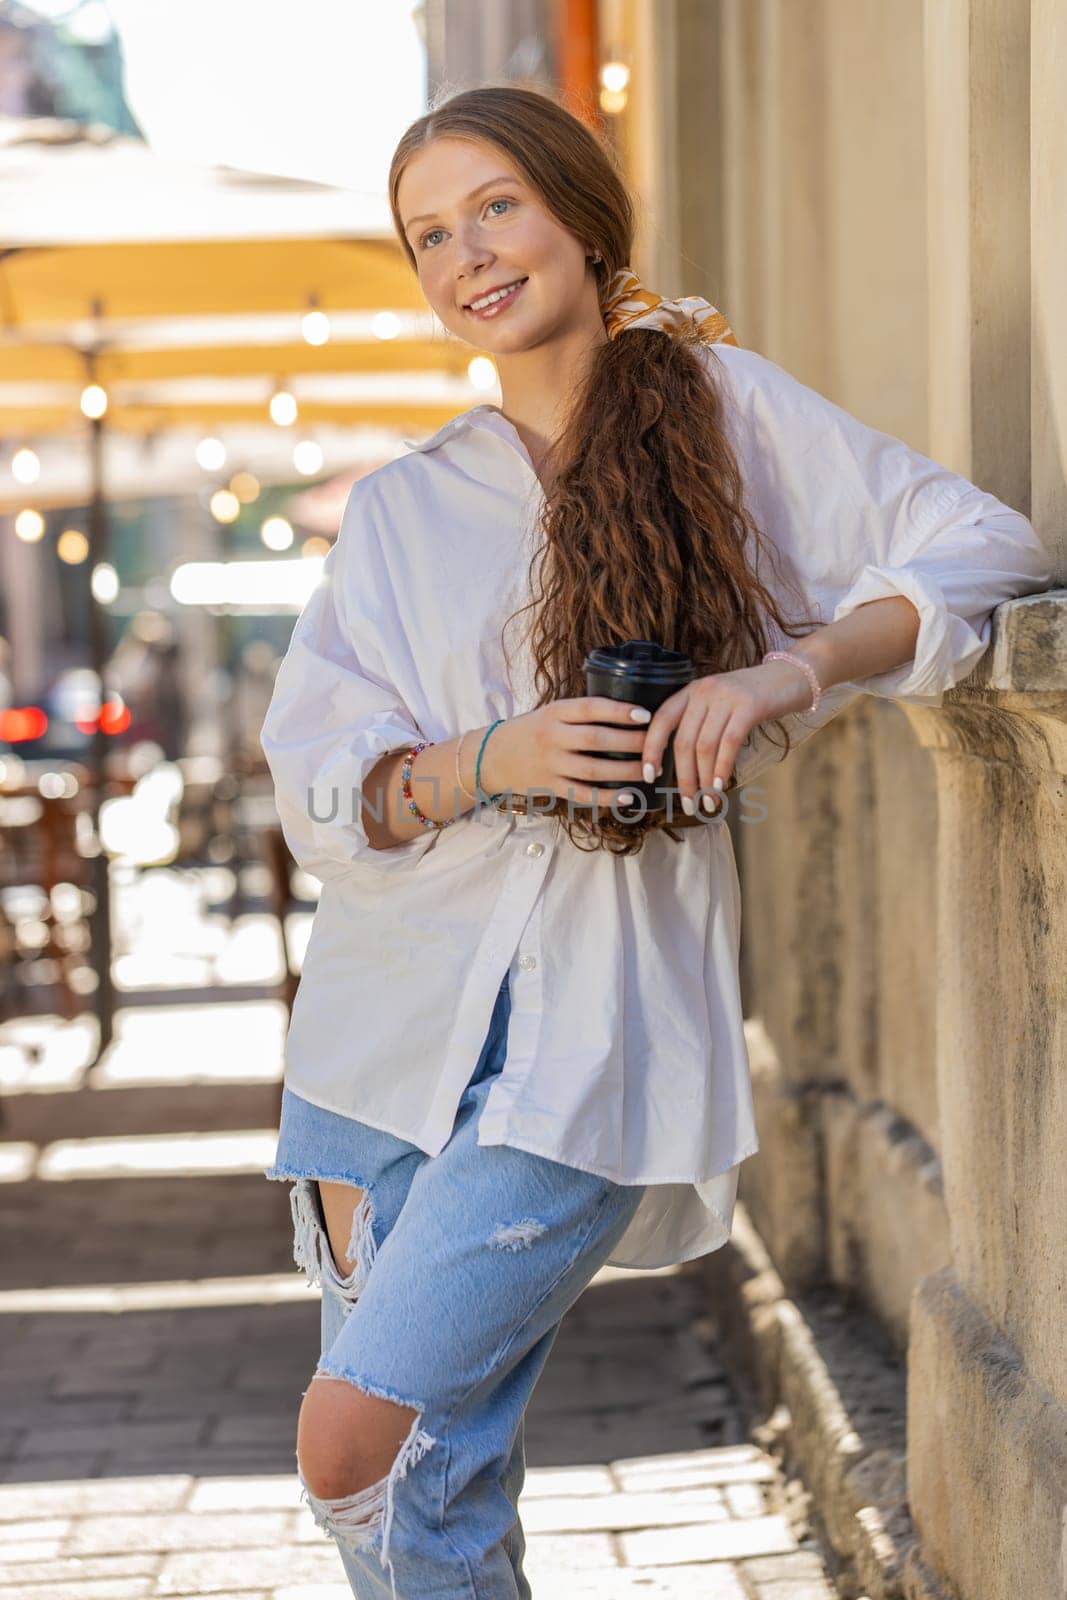 Happy redhead teenager girl enjoying morning coffee hot drink and smiling. Relaxing, taking a break. Young woman standing in urban city center street, drinking coffee to go. Town outside. Vertical